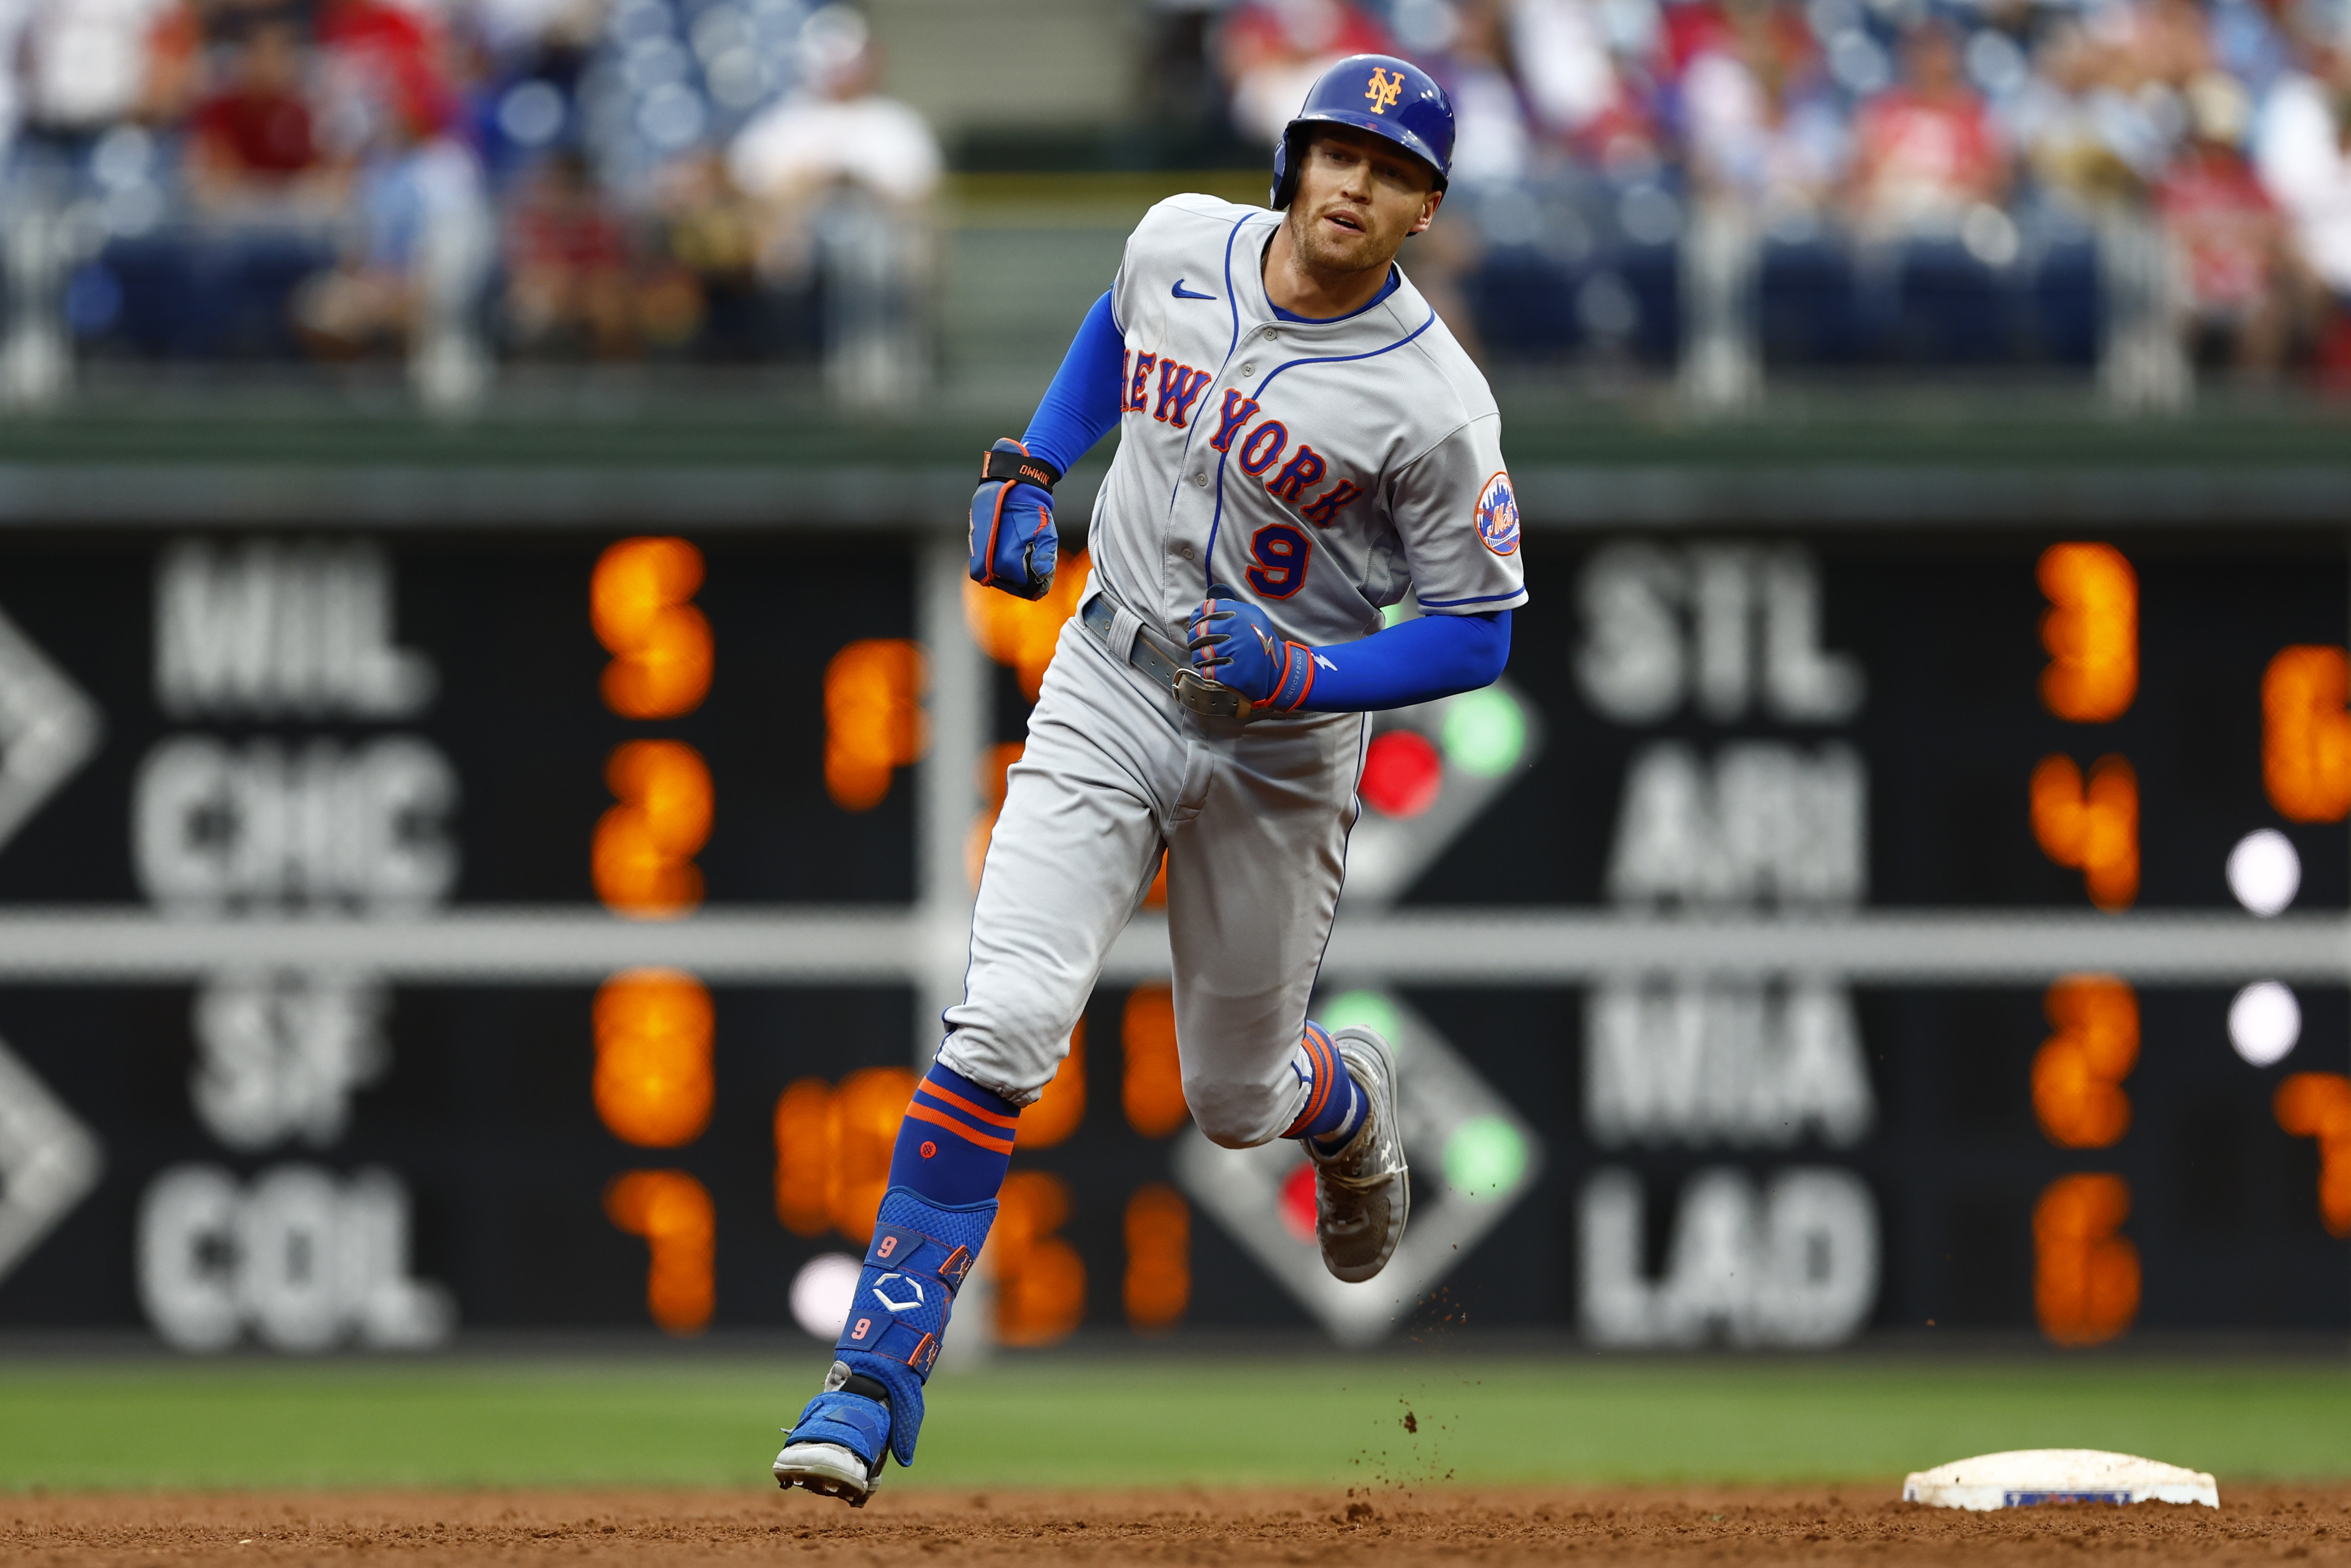 Brandon Nimmo #9 of the New York Mets rounds the bases after he hit a home run against the Philadelphia Phillies during the ninth inning of a game at Citizens Bank Park on August 21, 2022 in Philadelphia, Pennsylvania. The Mets defeated the Phillies 10-9.